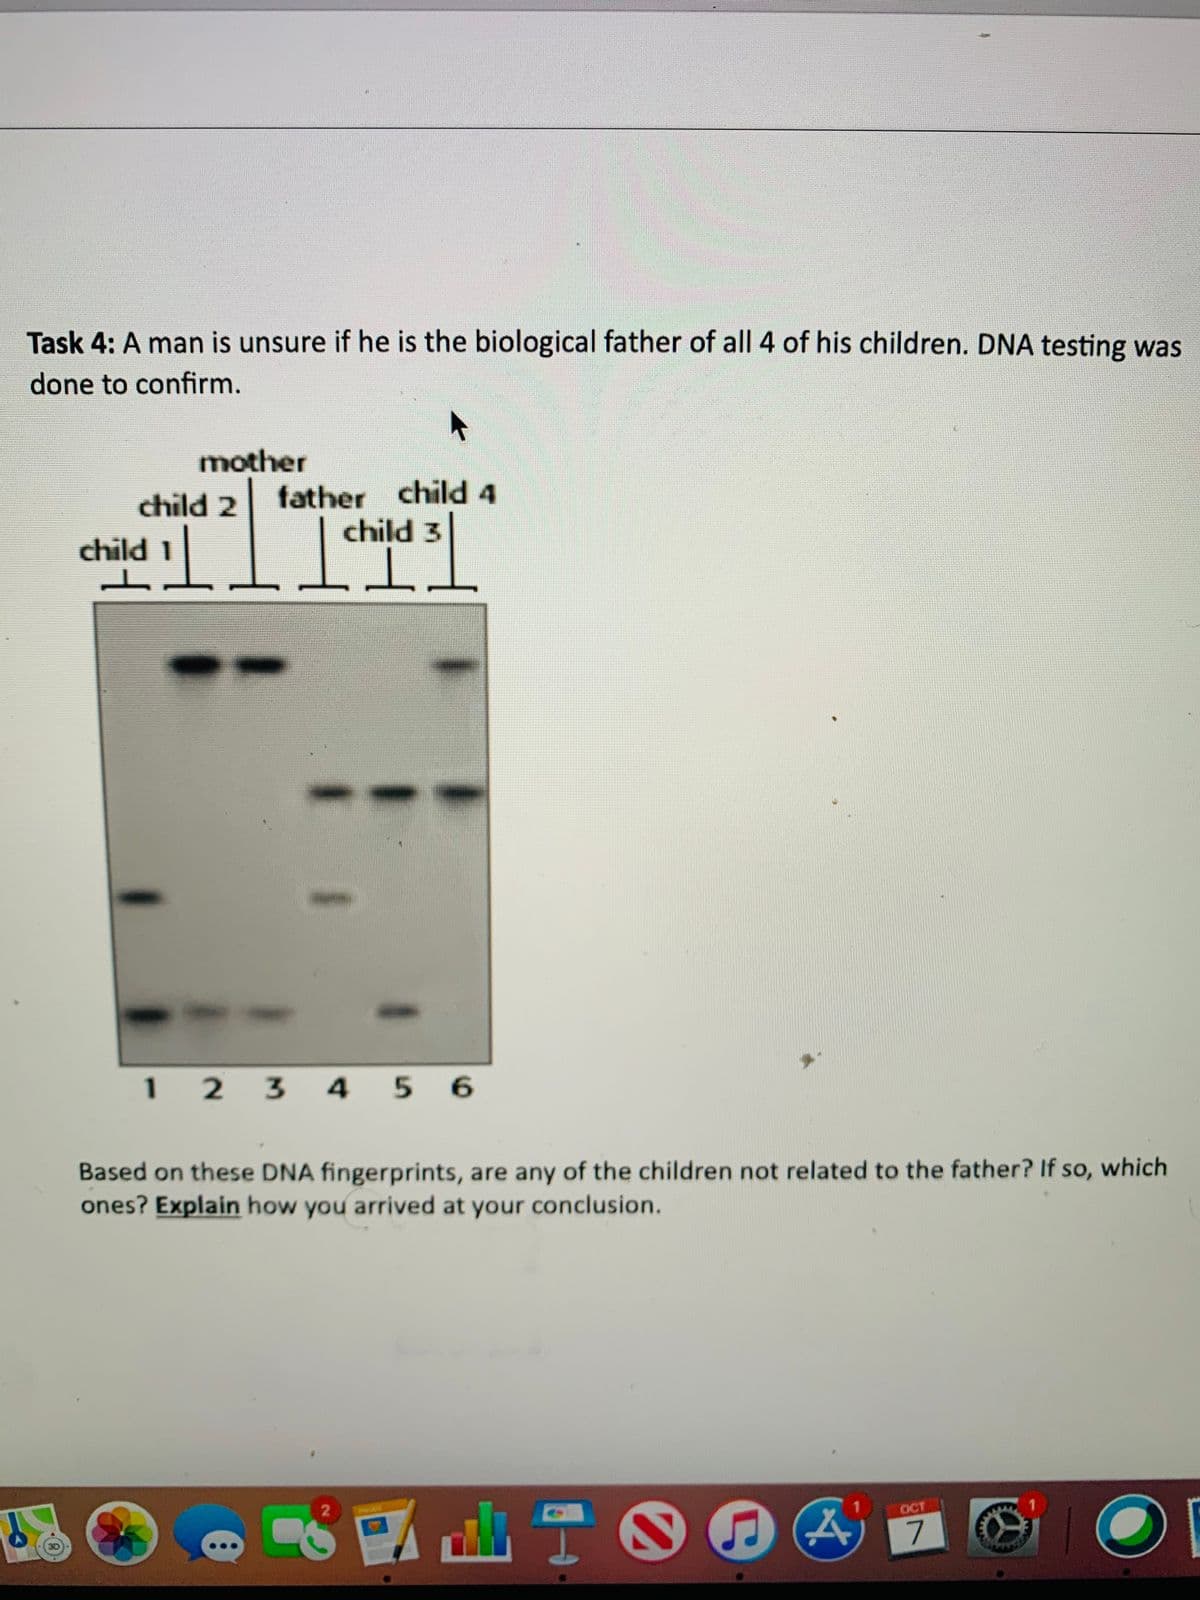 Task 4: A man is unsure if he is the biological father of all 4 of his children. DNA testing was
done to confirm.
mother
child 2
father child 4
child 1 child 3
1 2 3 4 5 6
Based on these DNA fingerprints, are any of the children not related to the father? If so, which
ones? Explain how you arrived at your conclusion.
d山TO
OCT
